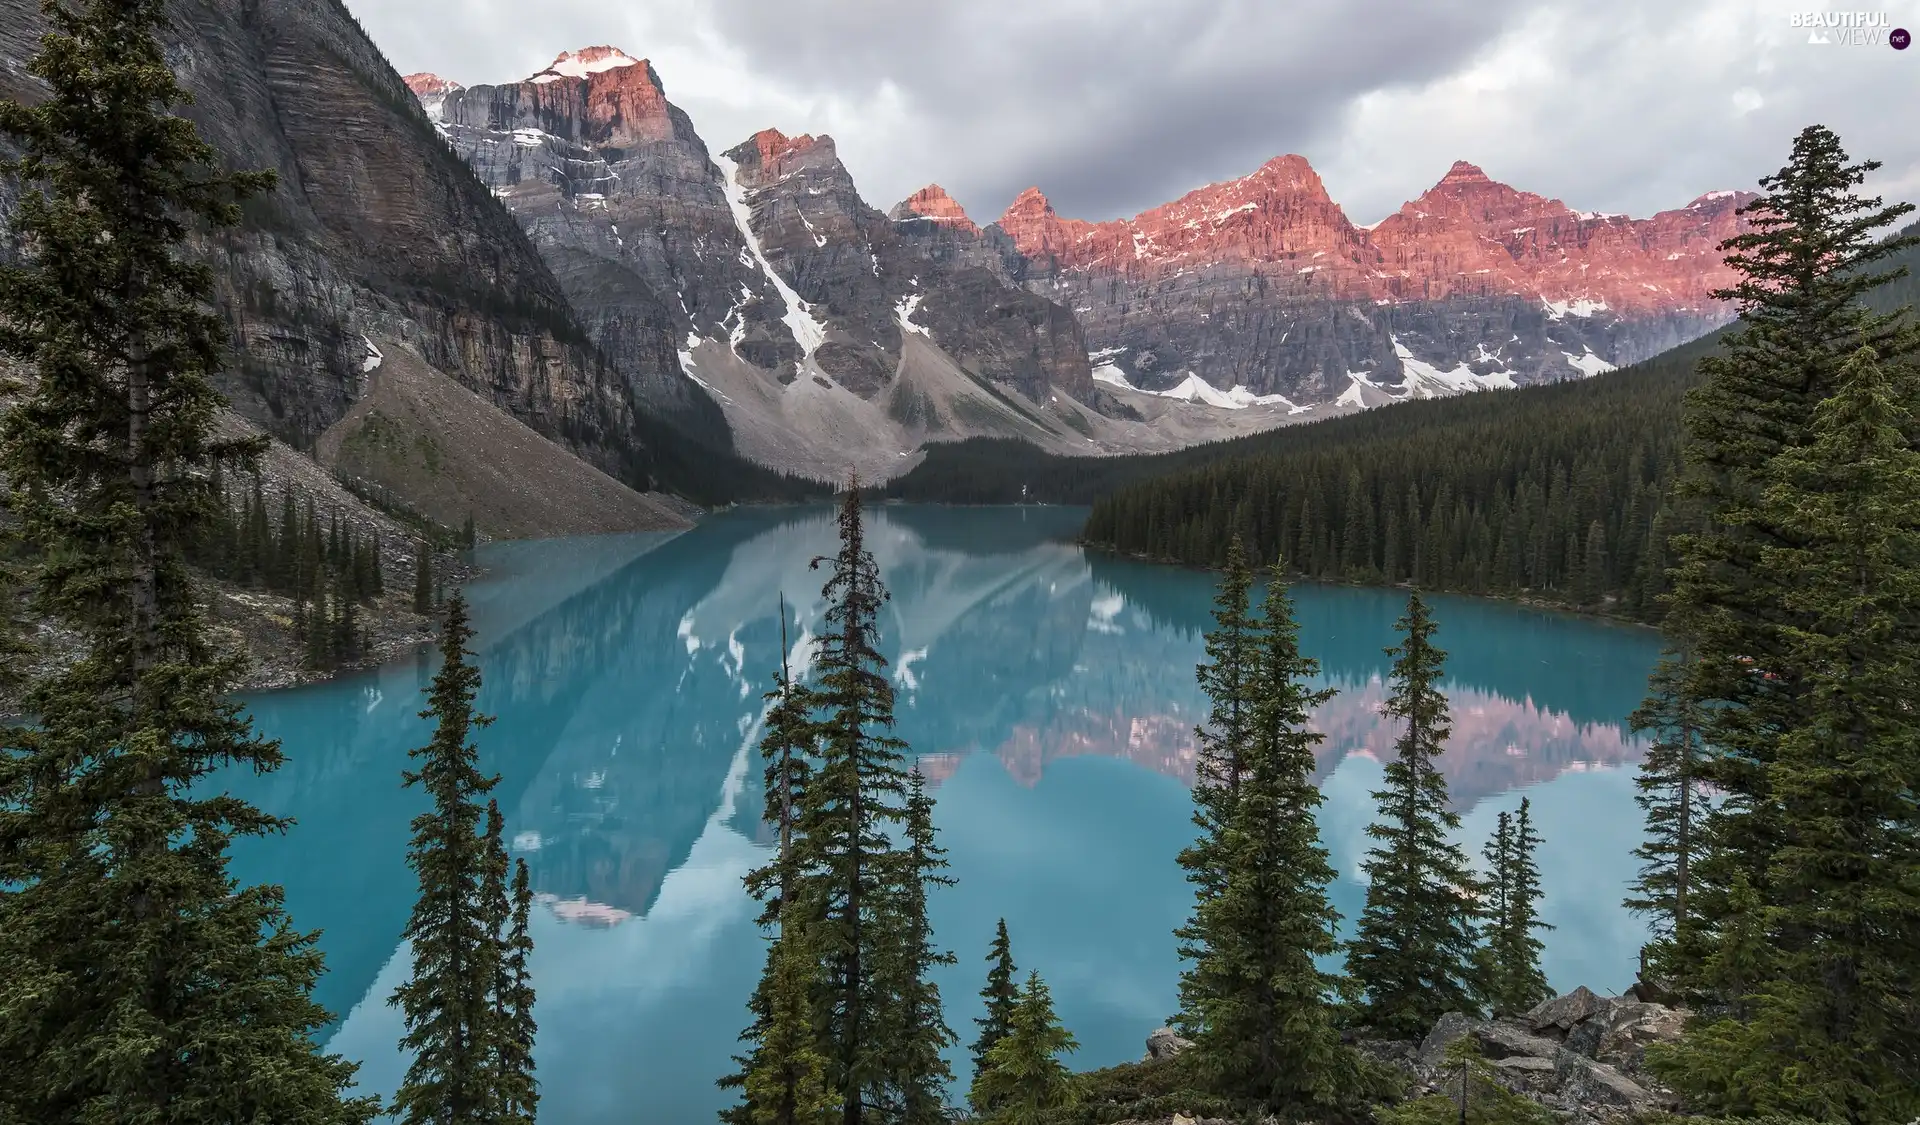 Province of Alberta, Lake Moraine, Mountains, trees, Spruces, Canada, Banff National Park, viewes